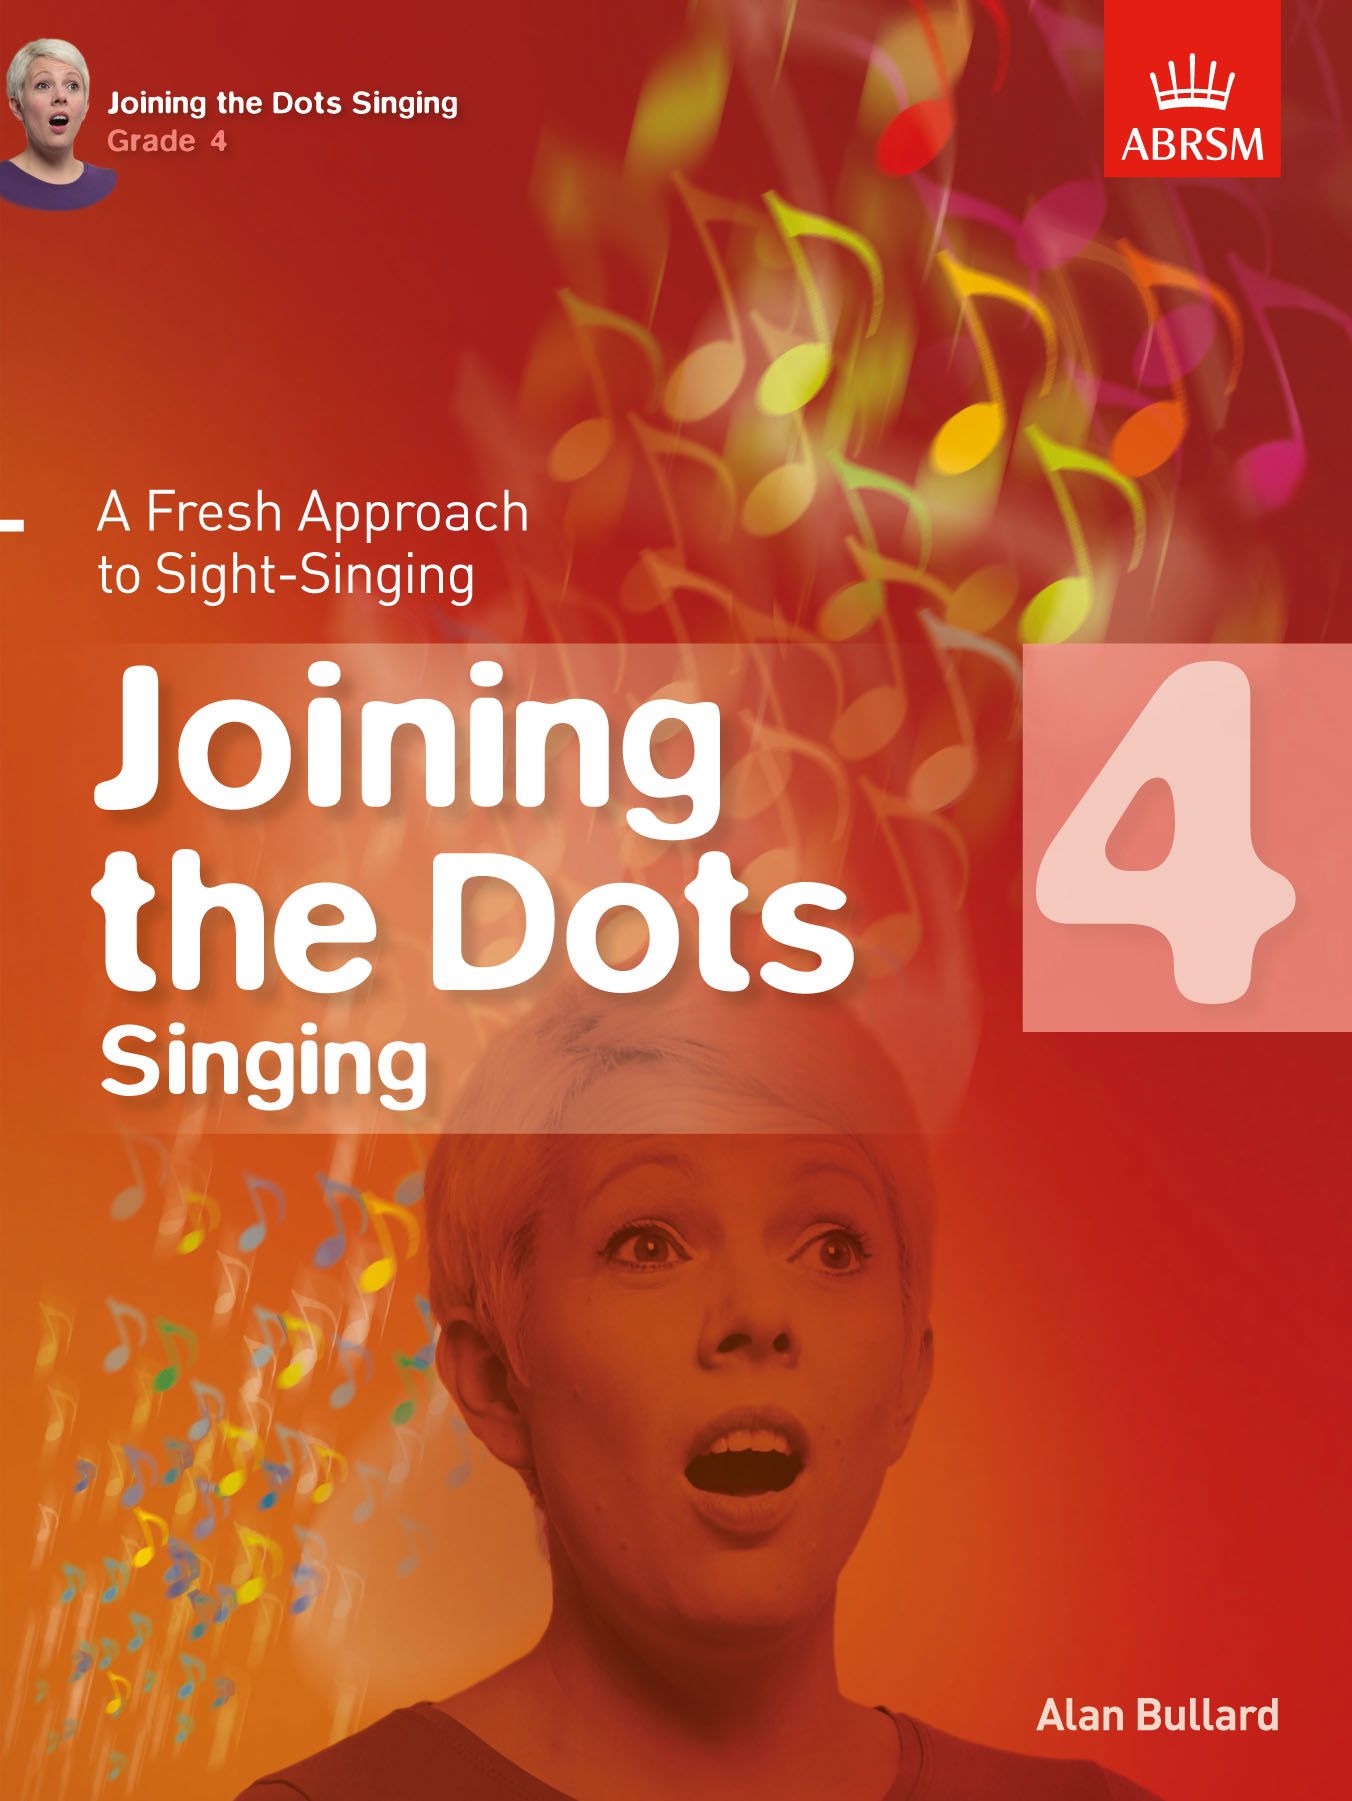 Joining the Dots for Singing G4